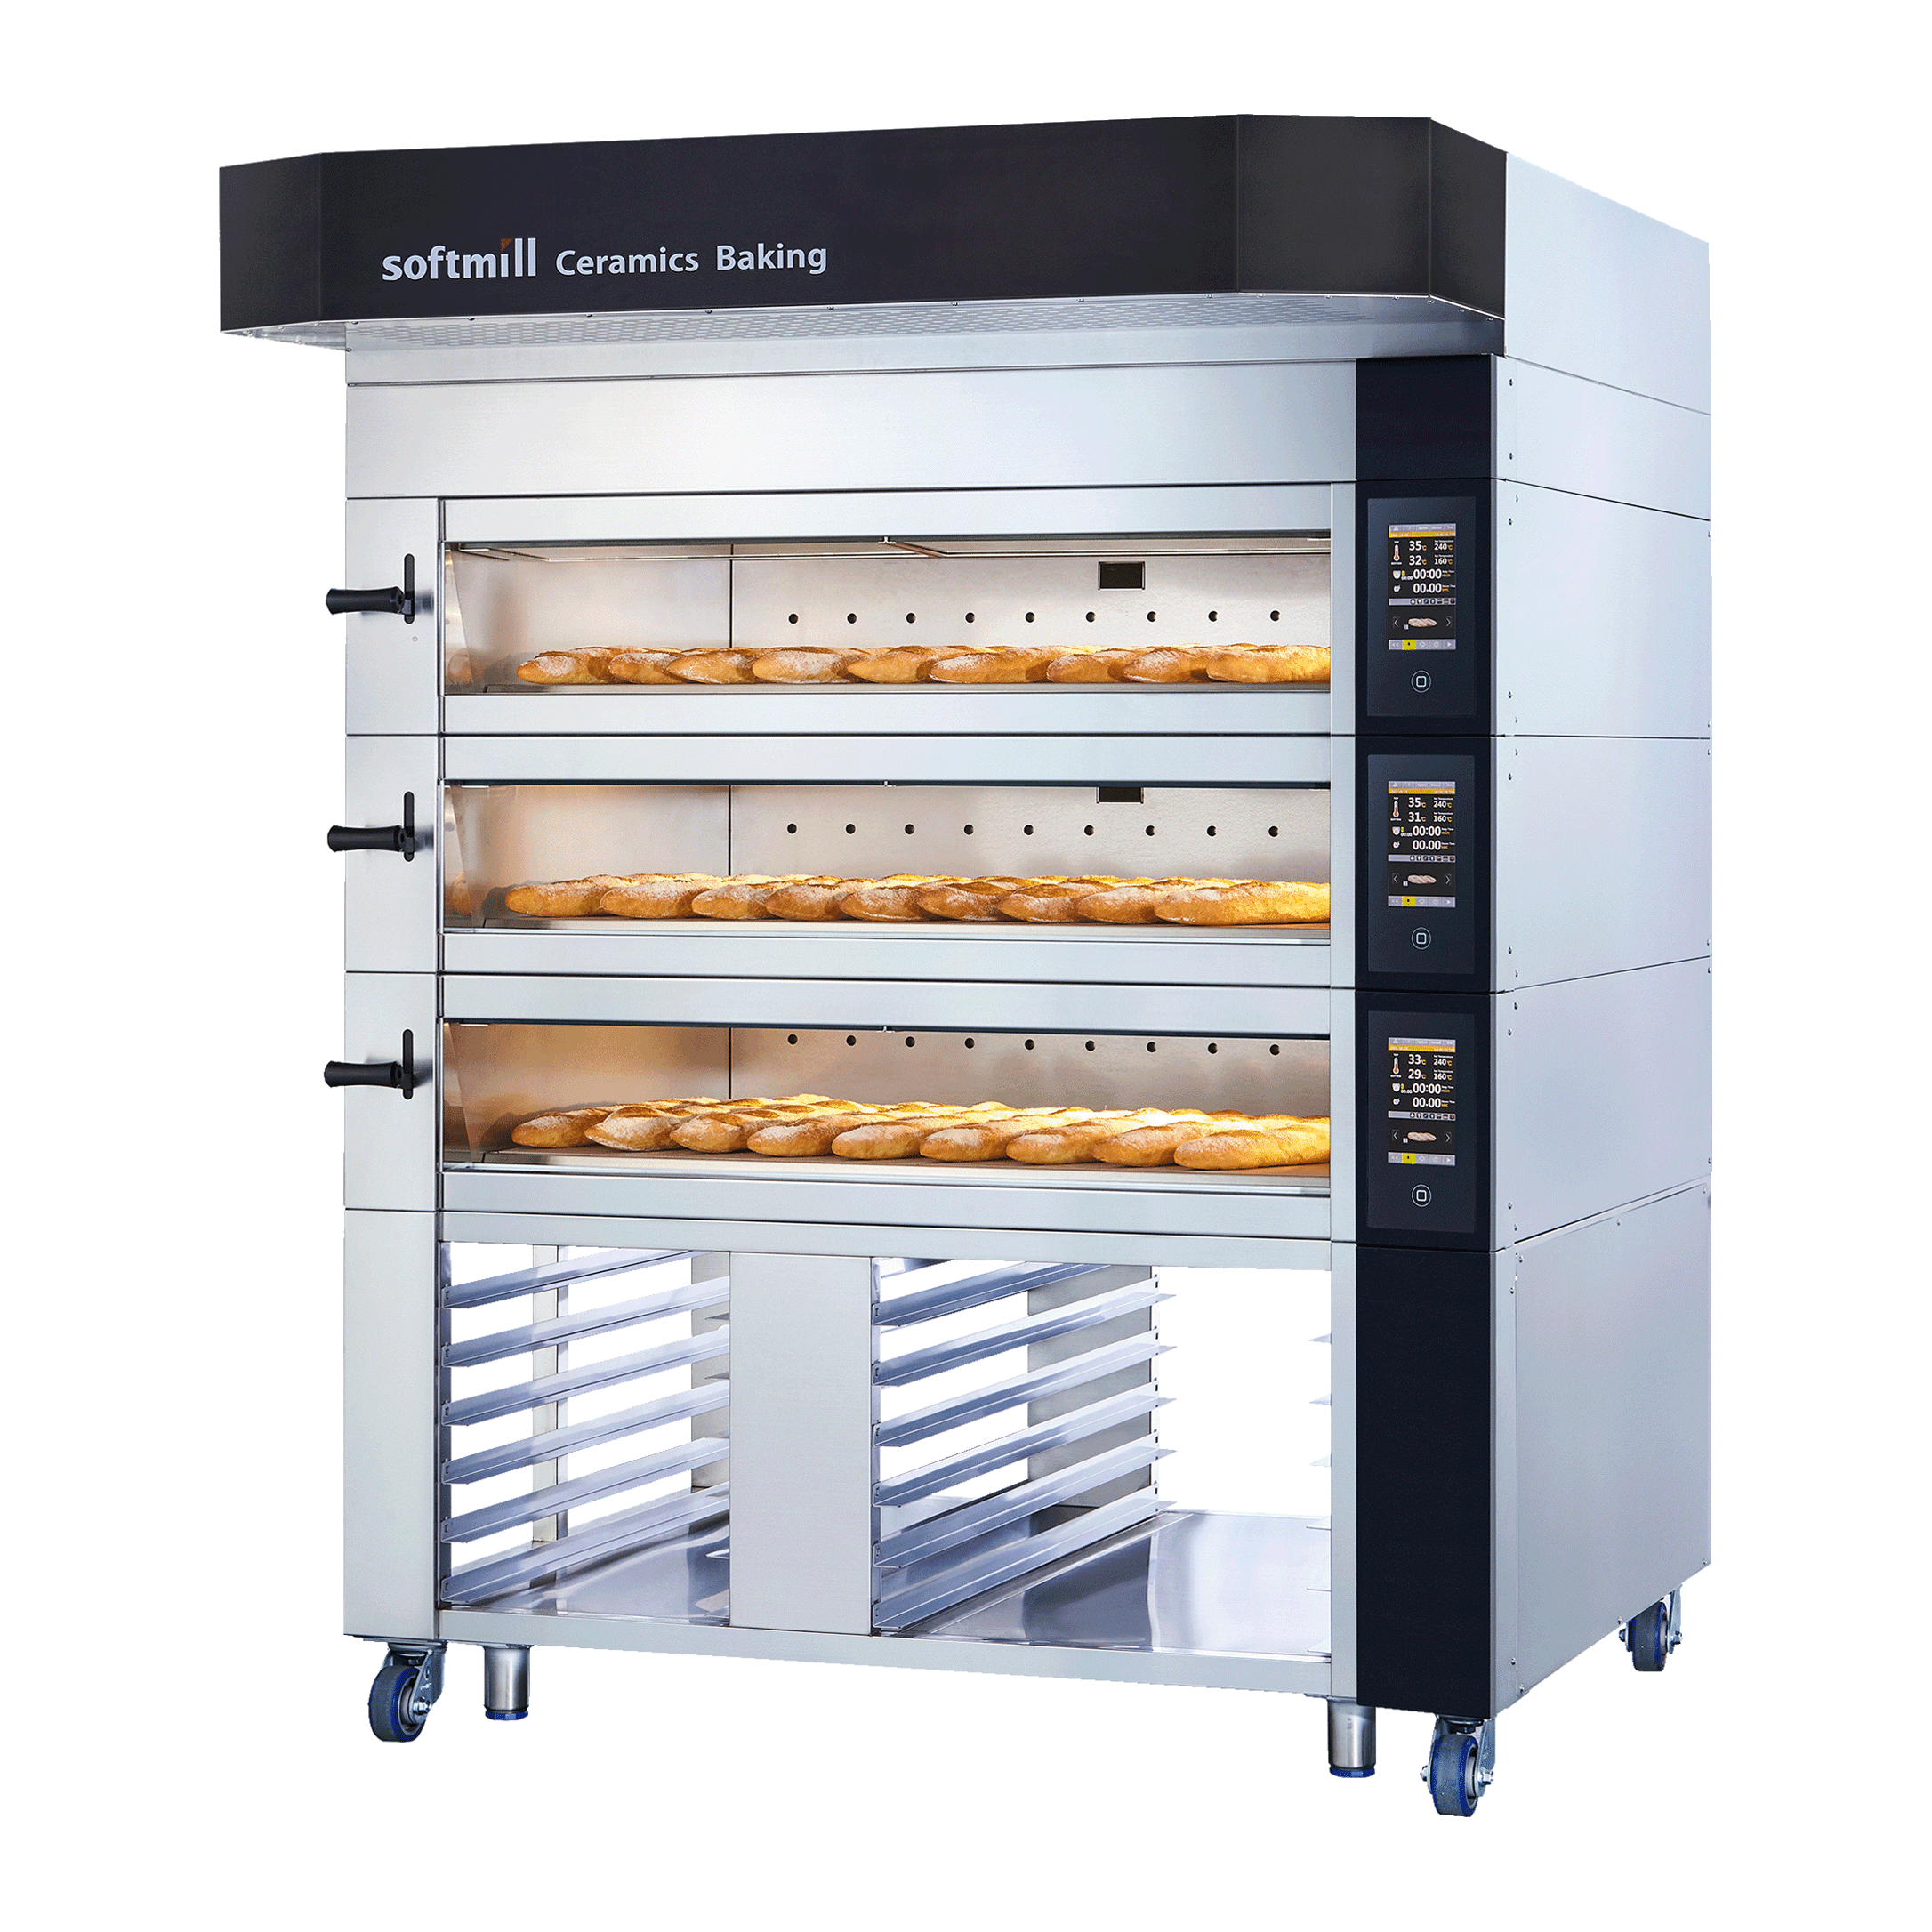 InnoBC Oven 4 trays 3 tiers main carousel mini size images